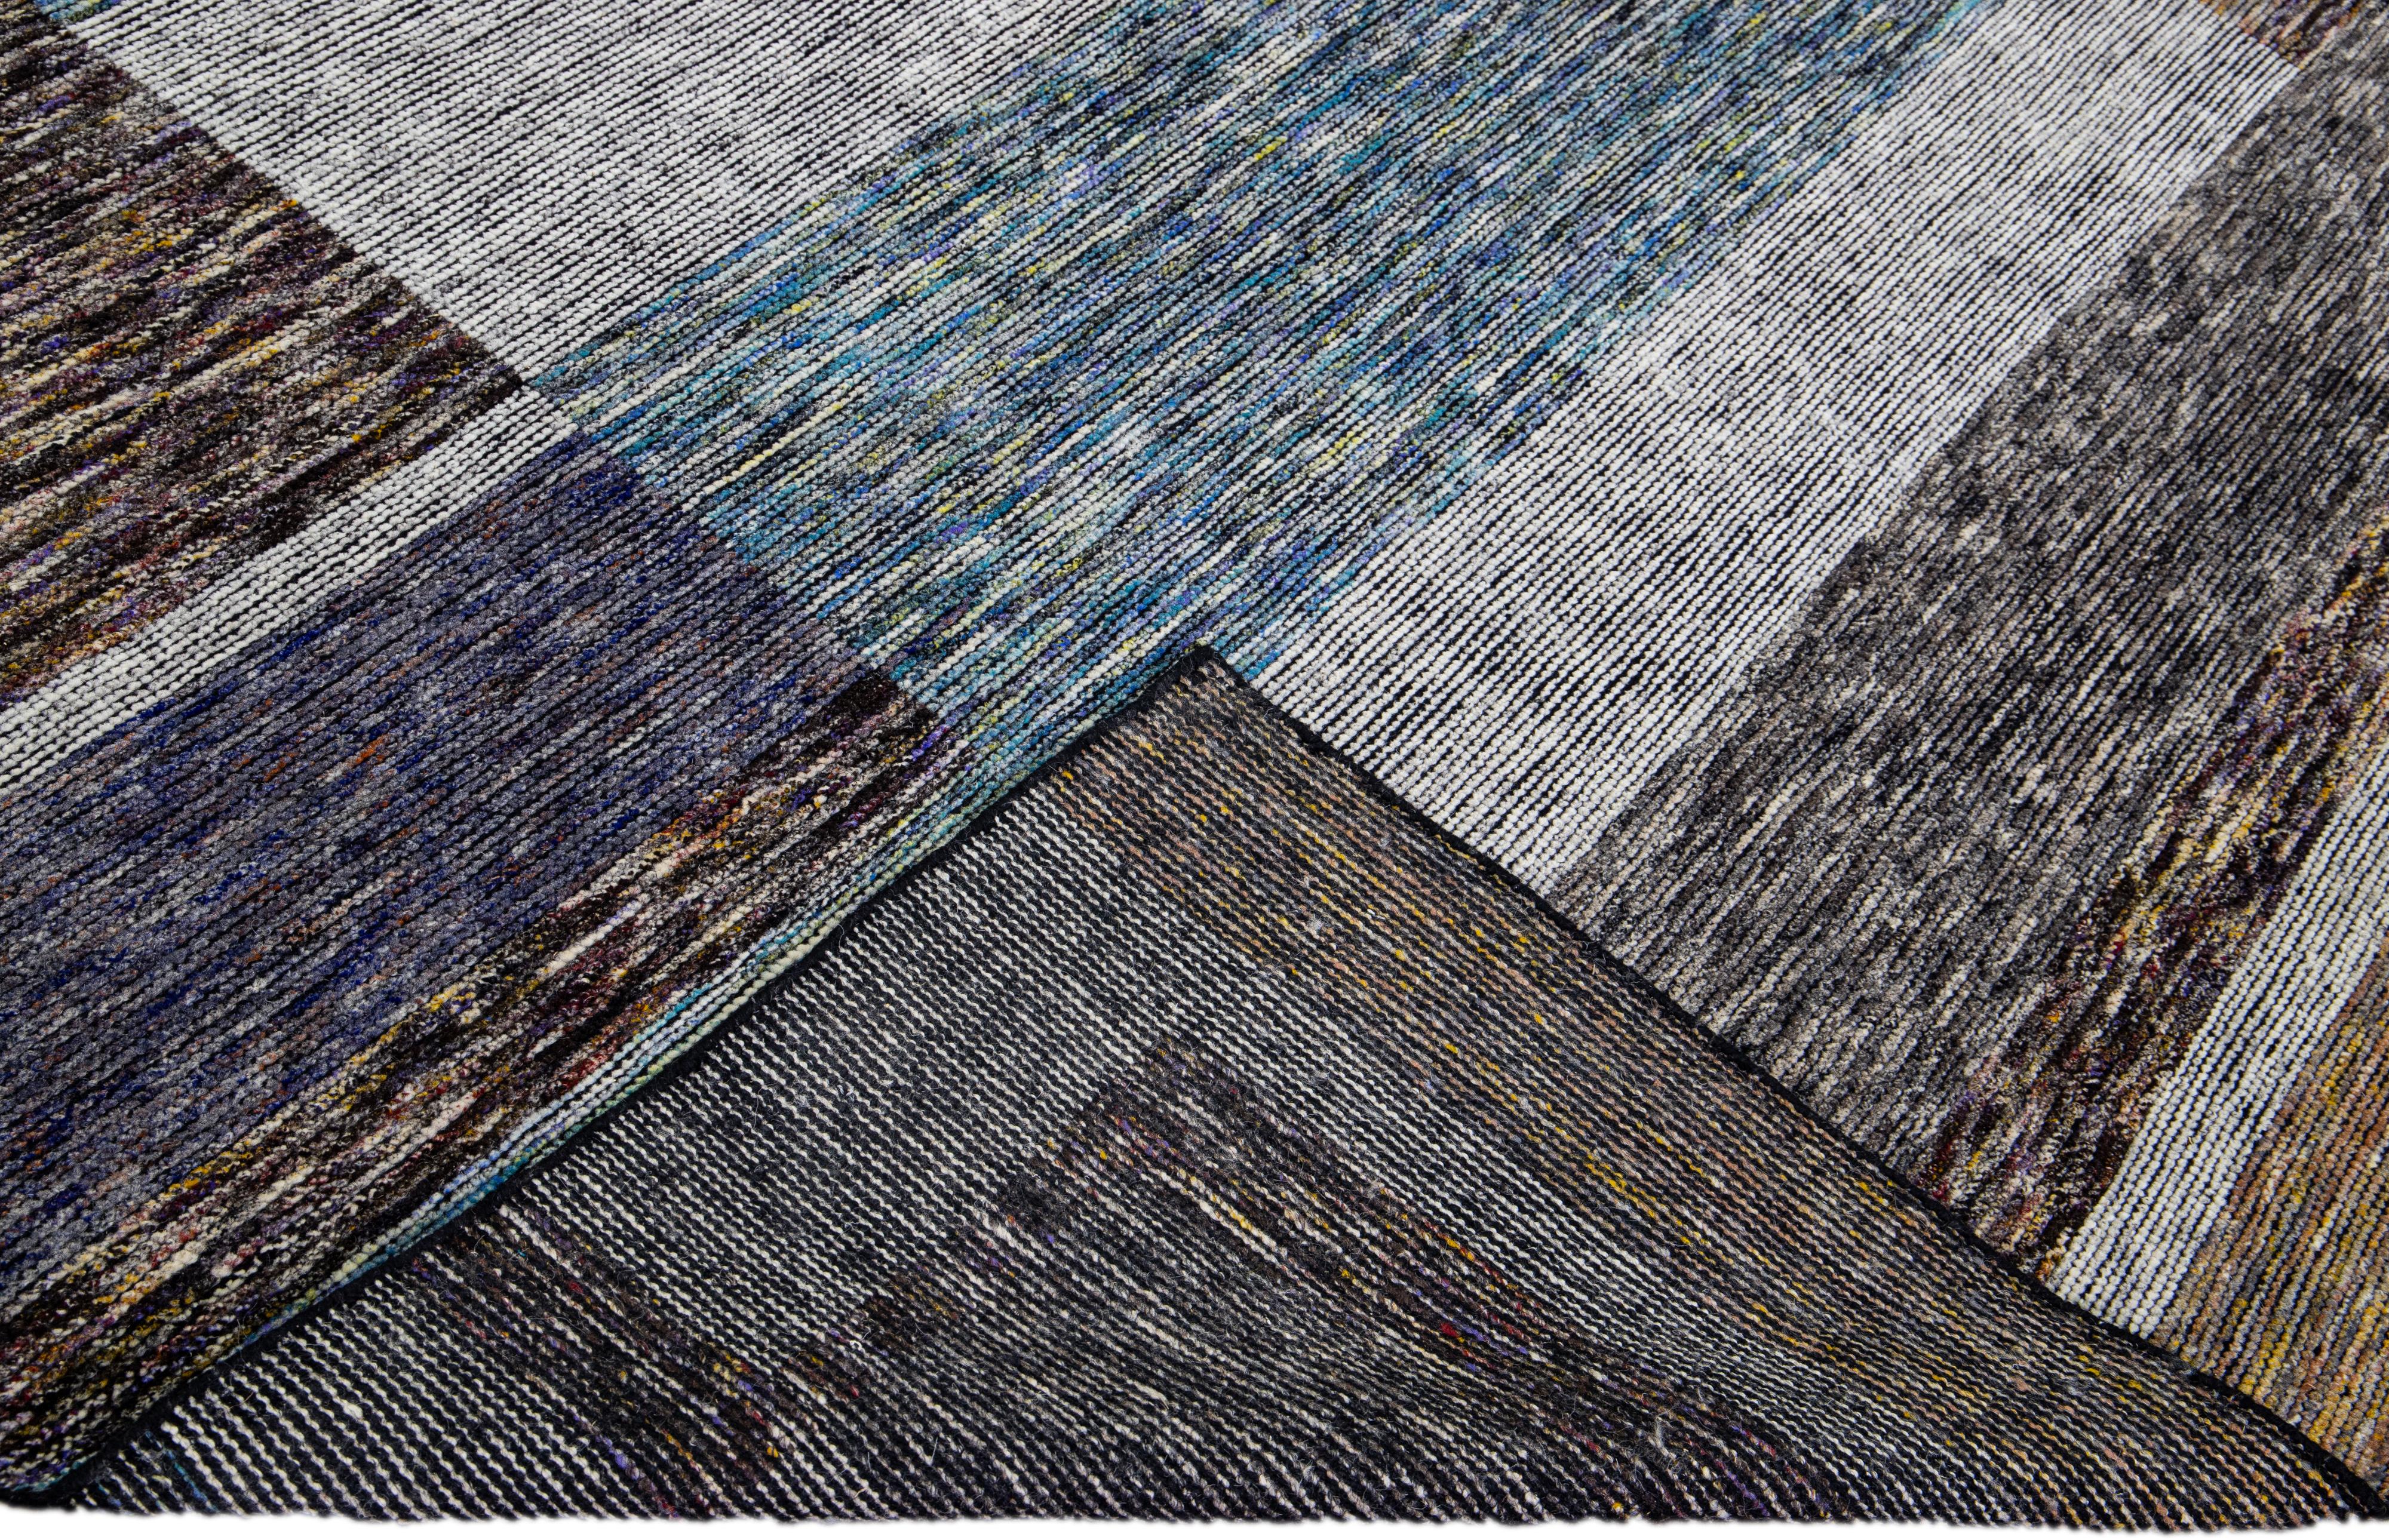 Beautiful modern Apadana's Safi Collection hand-knotted wool rug with an earthy colors field. This Modern rug has blue, gray, and brown accents a gorgeous layout Abstract design.

This rug measures: 9'3